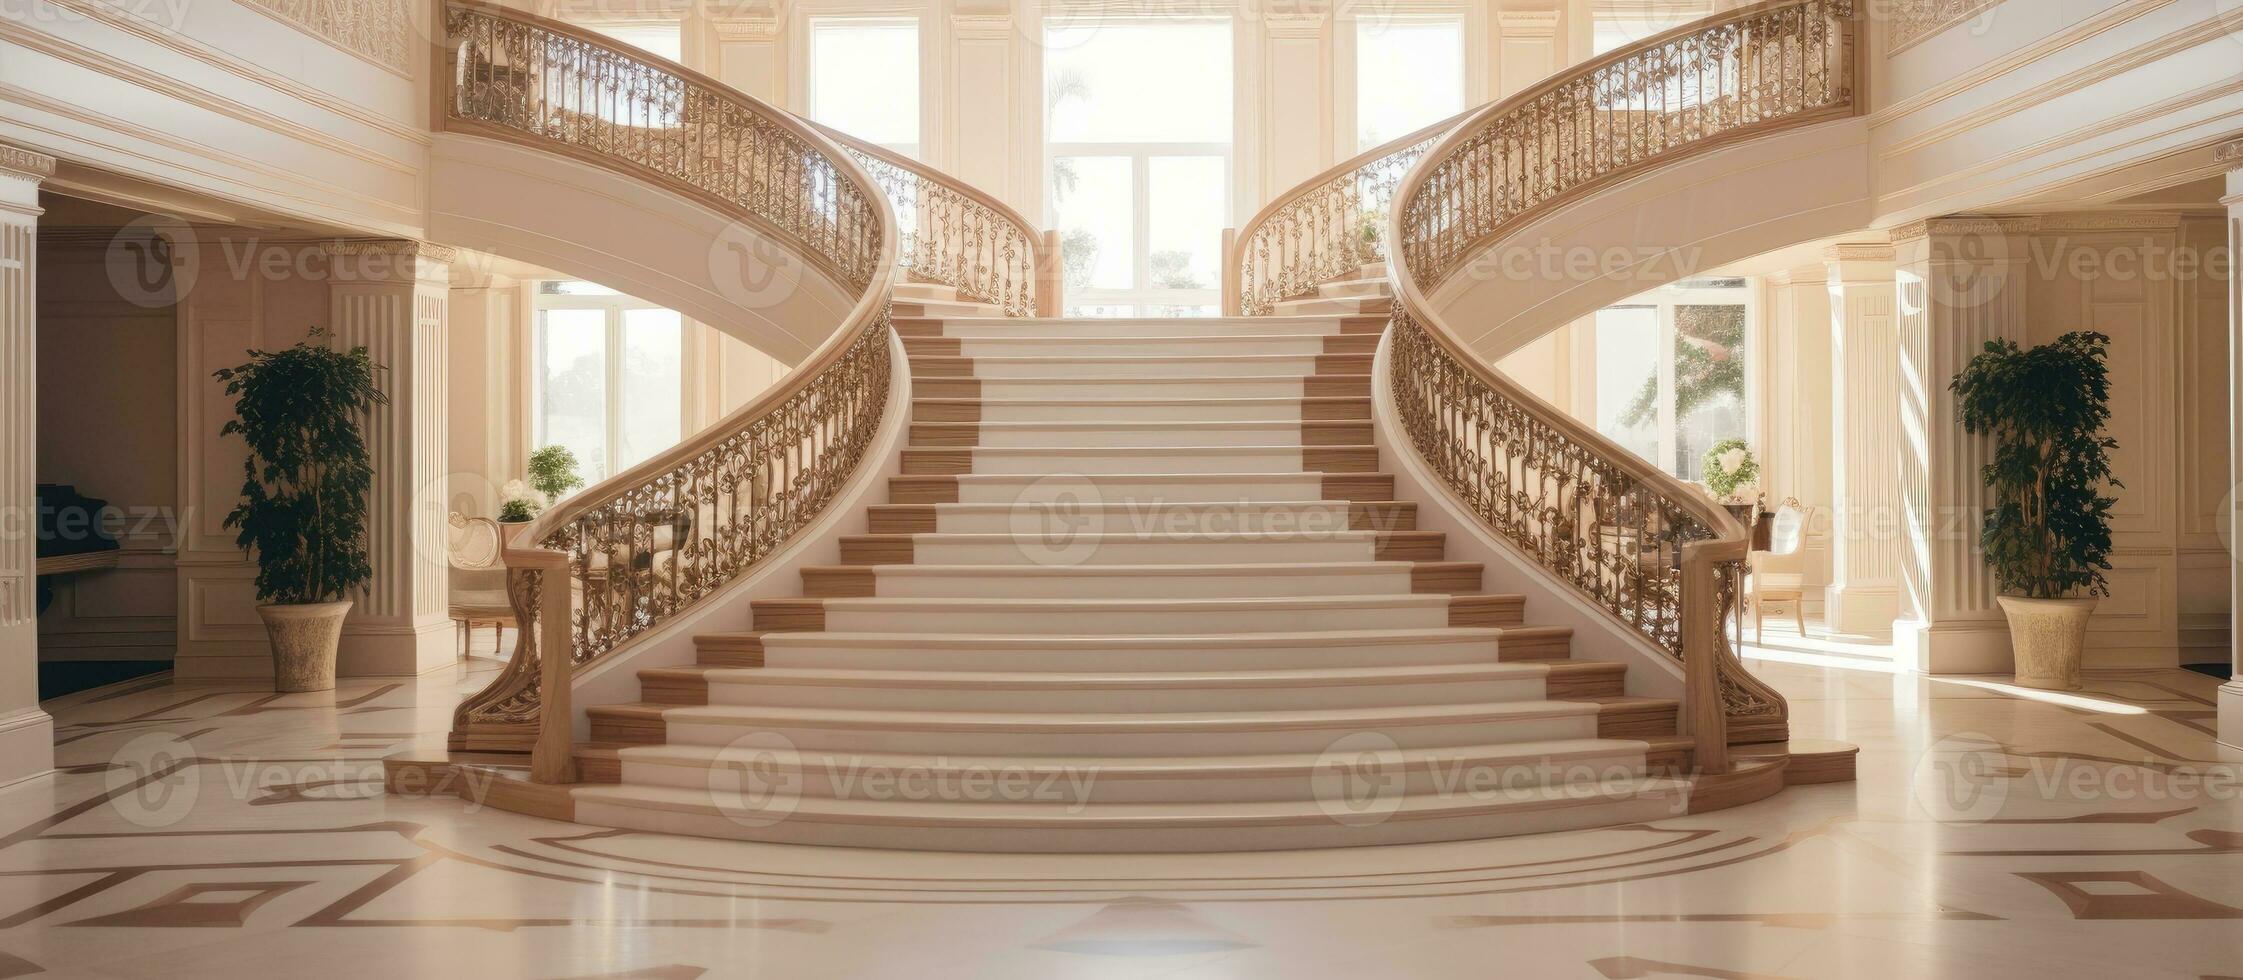 California 4 May 2021 Elegant illuminated stairway in spacious mansion with modern design Stylish railing and bright elements create a luxurious interior photo